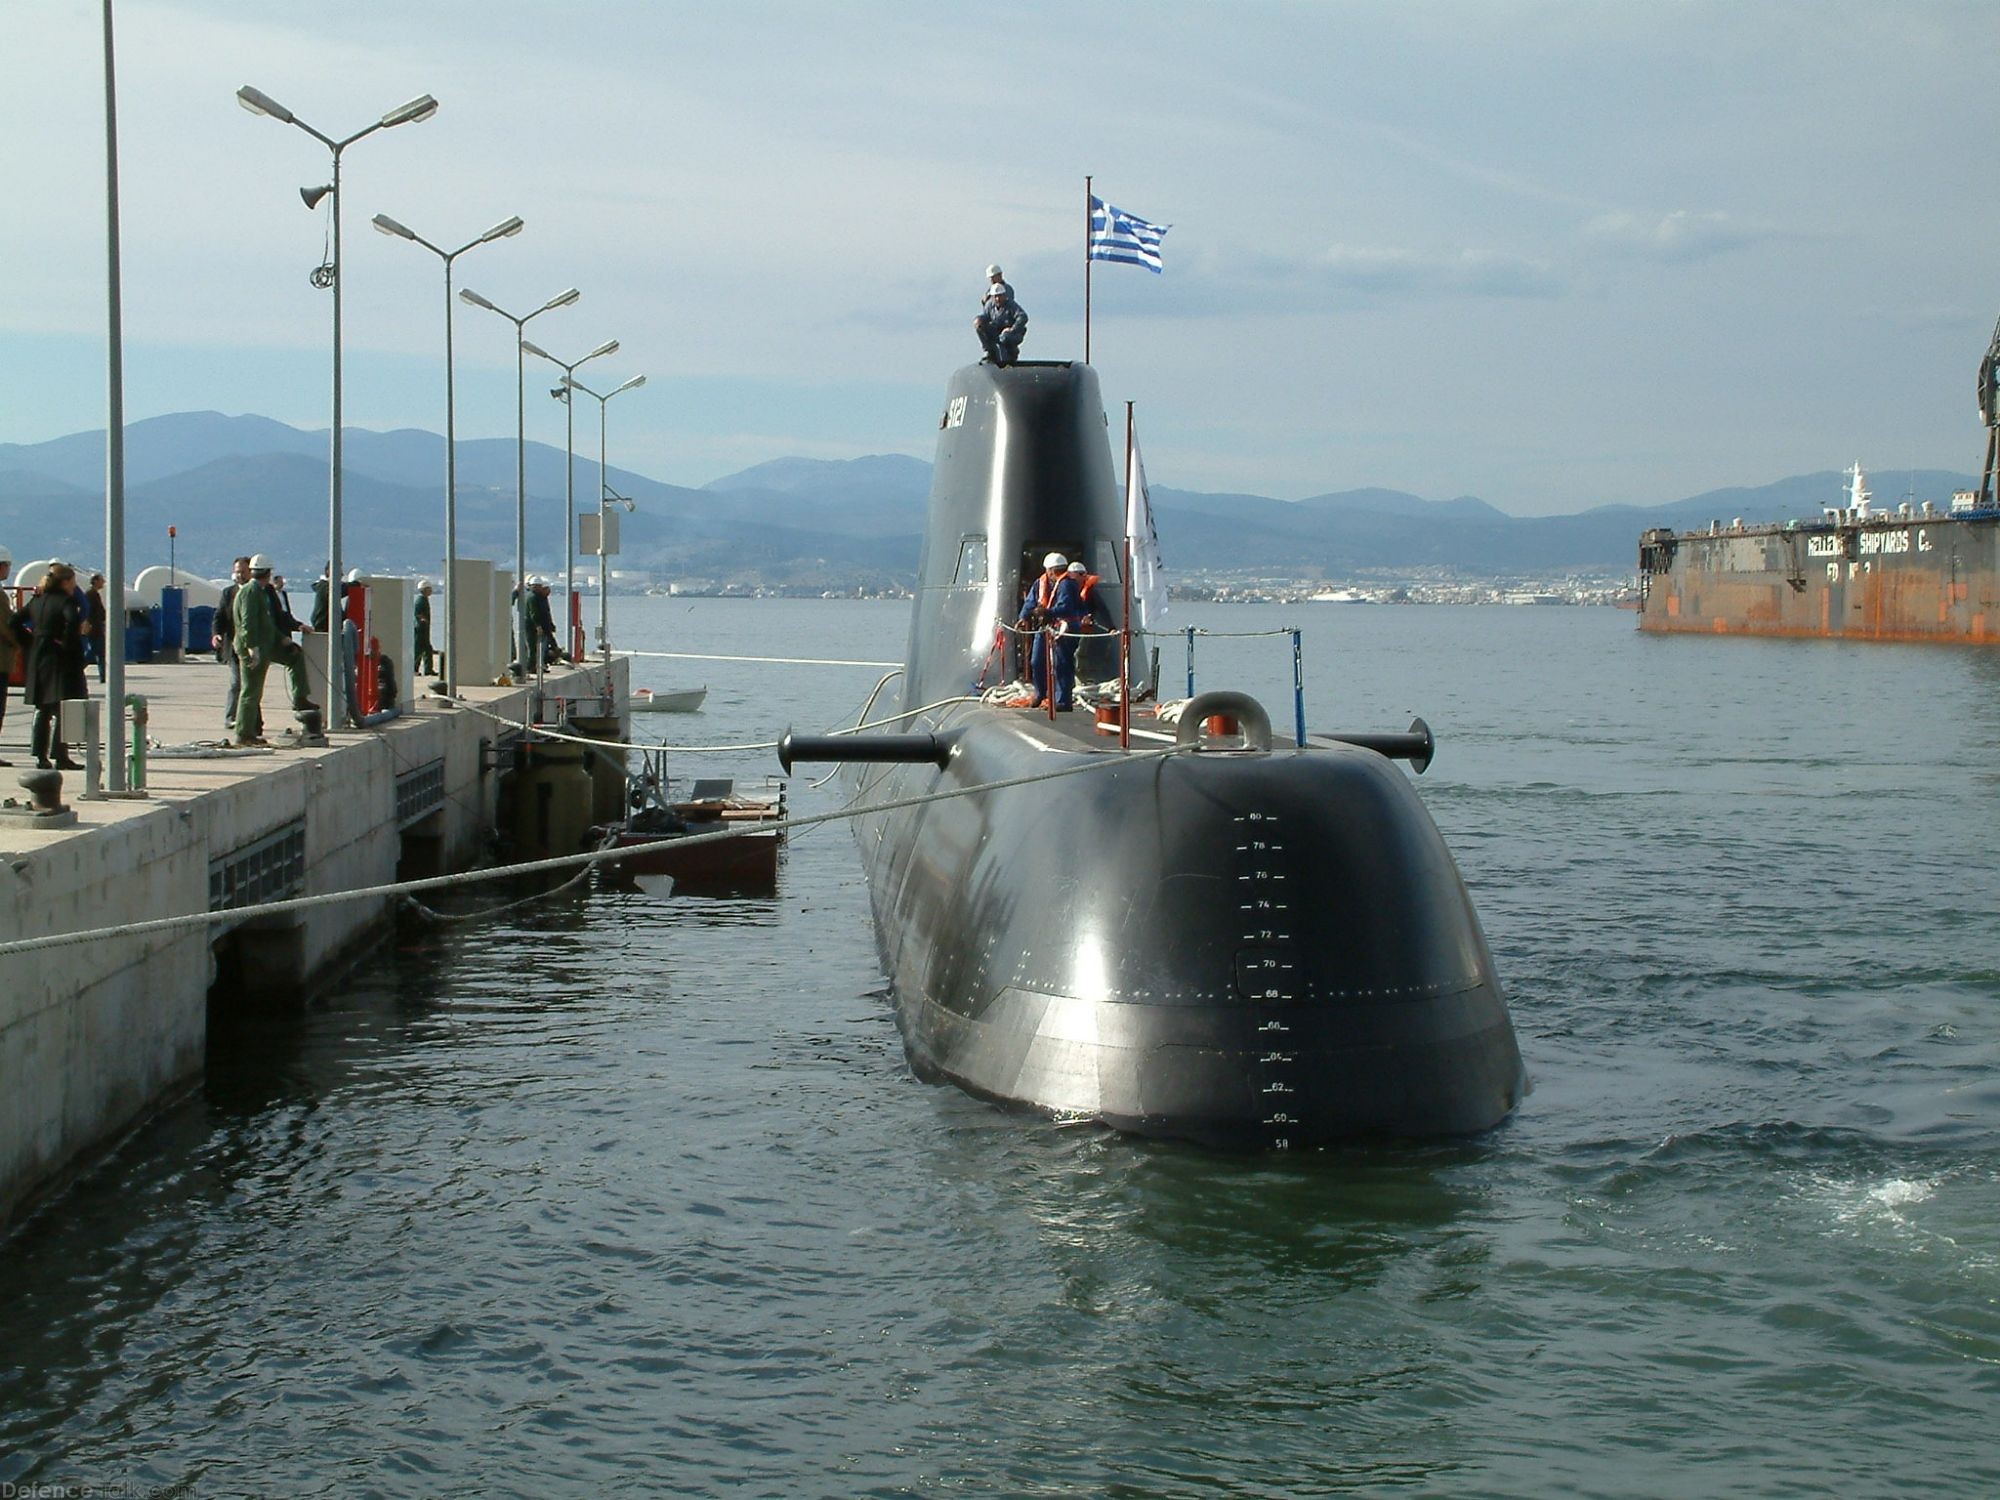 H/N Submarine Pipinos after Launching February 2007